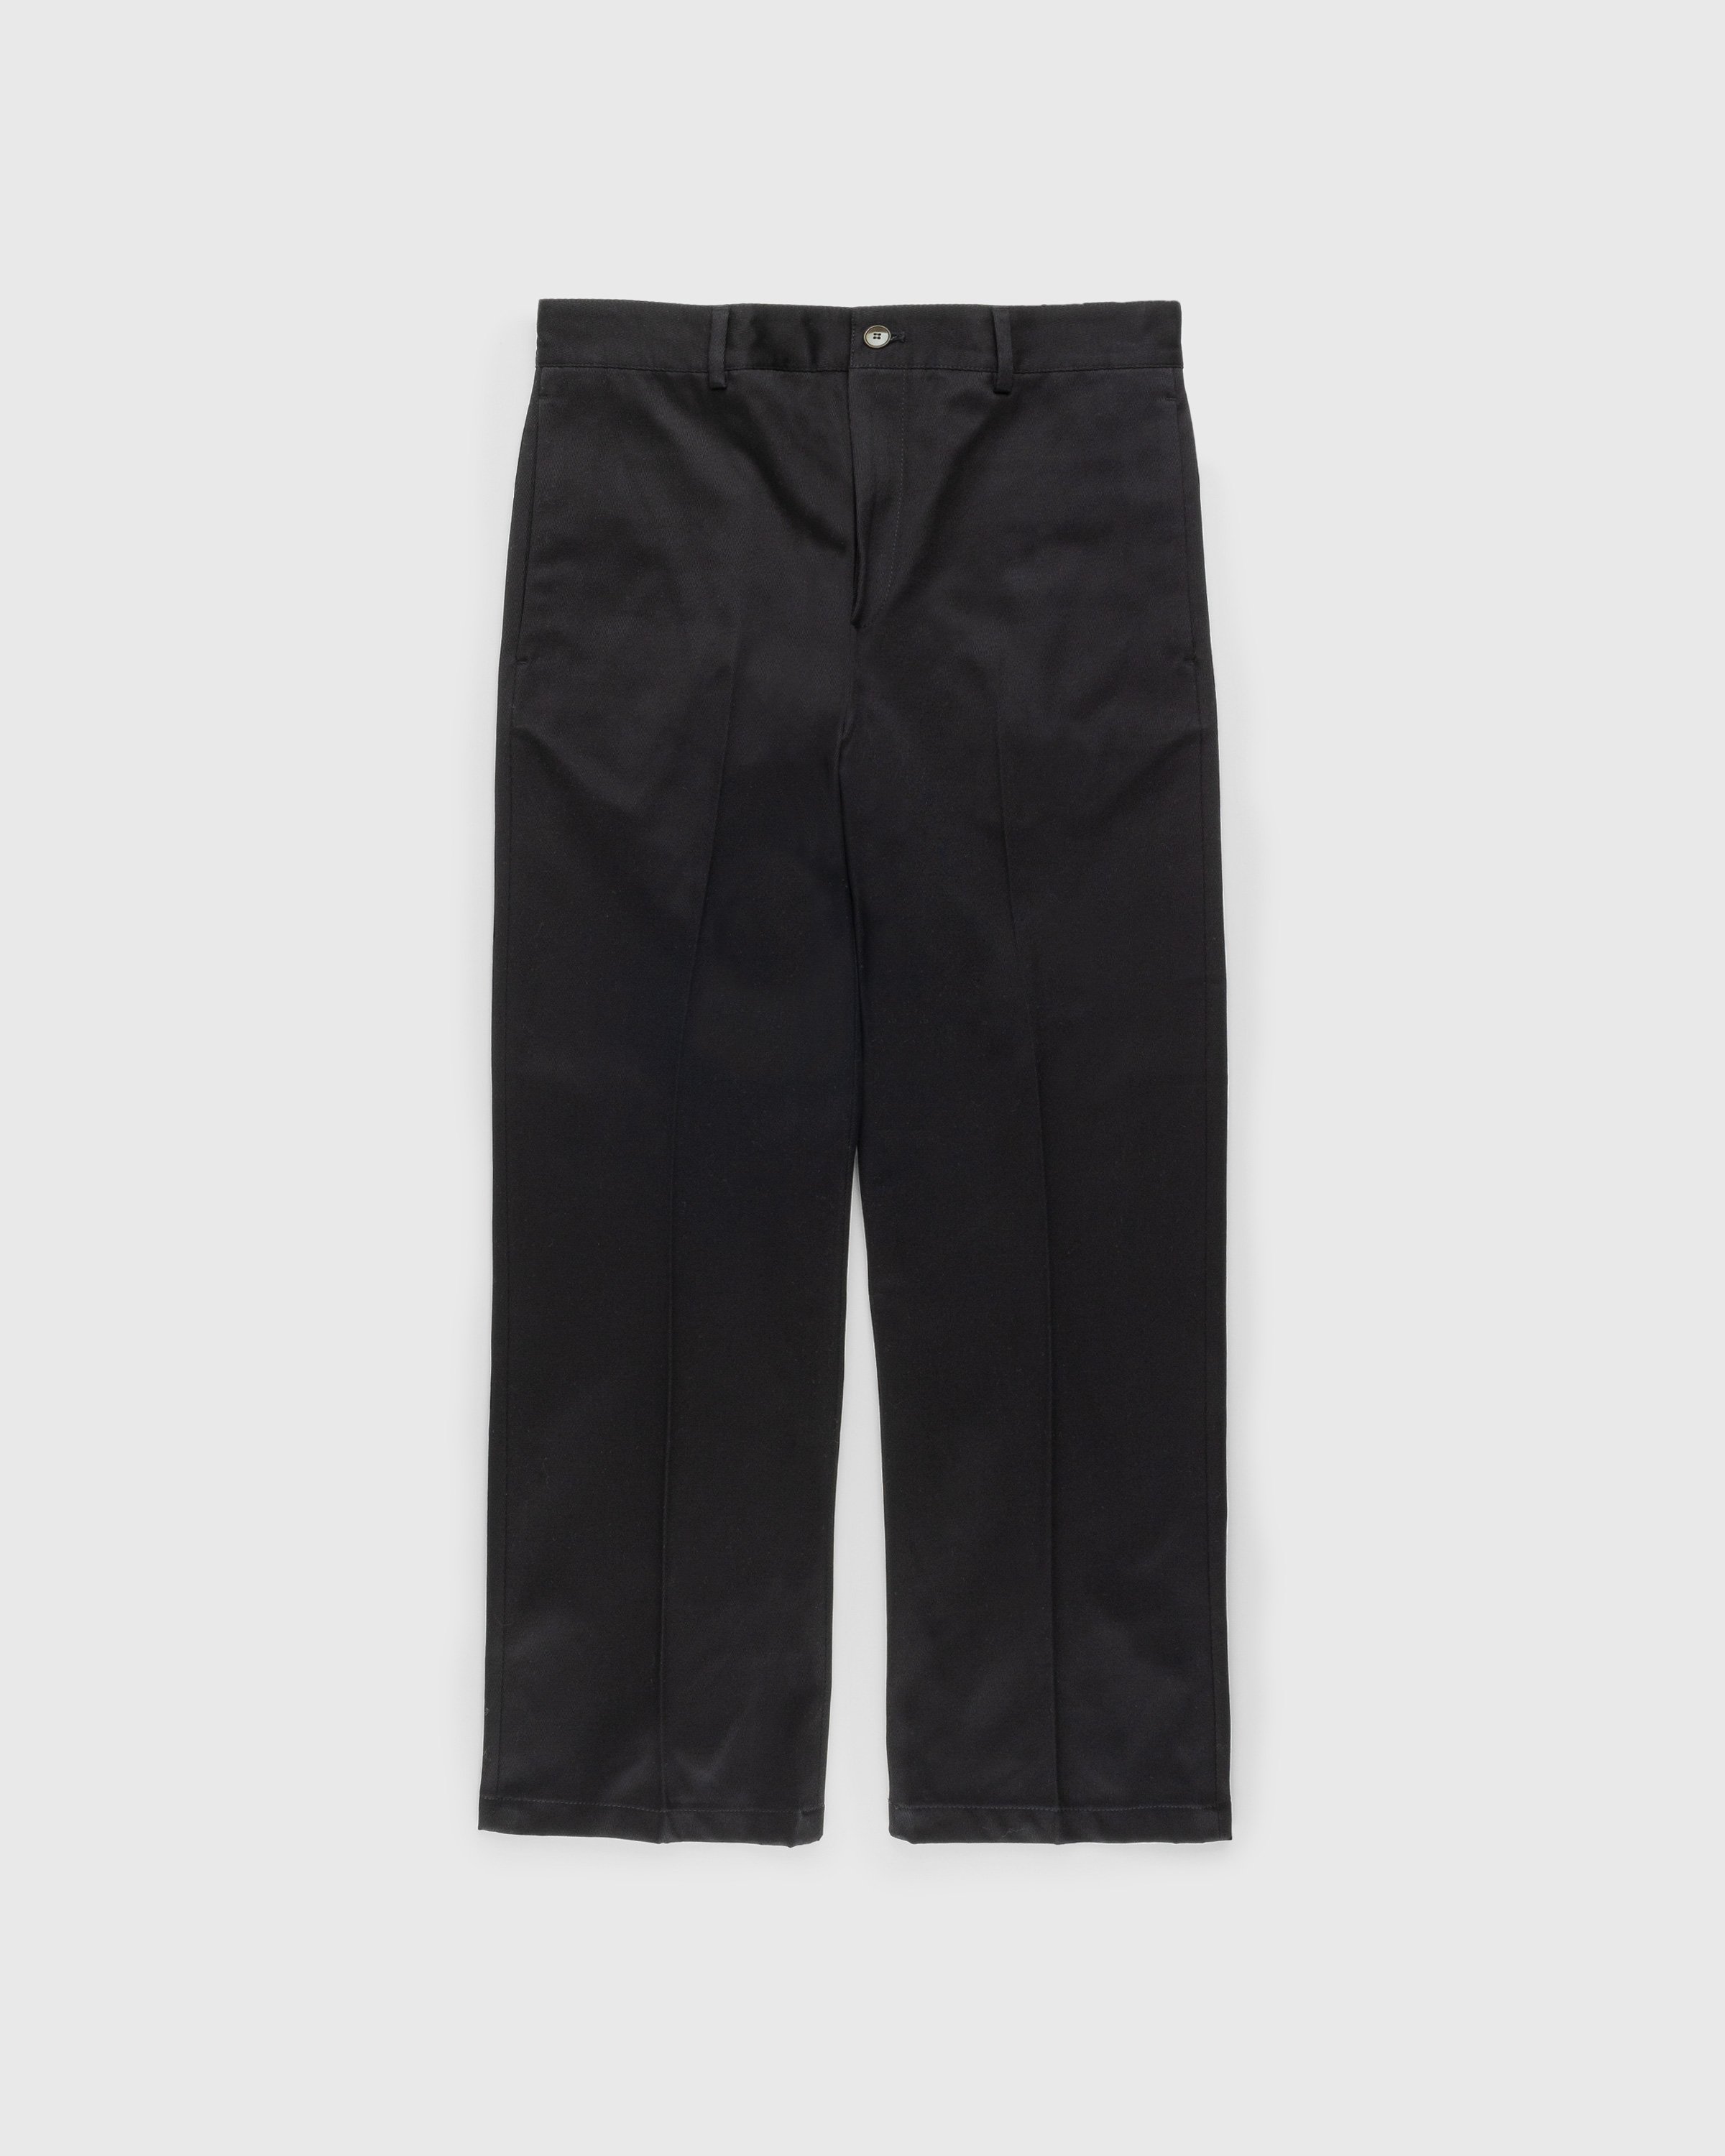 Acne Studios - Wool Blend Tailored Trousers Black - Clothing - Black - Image 1